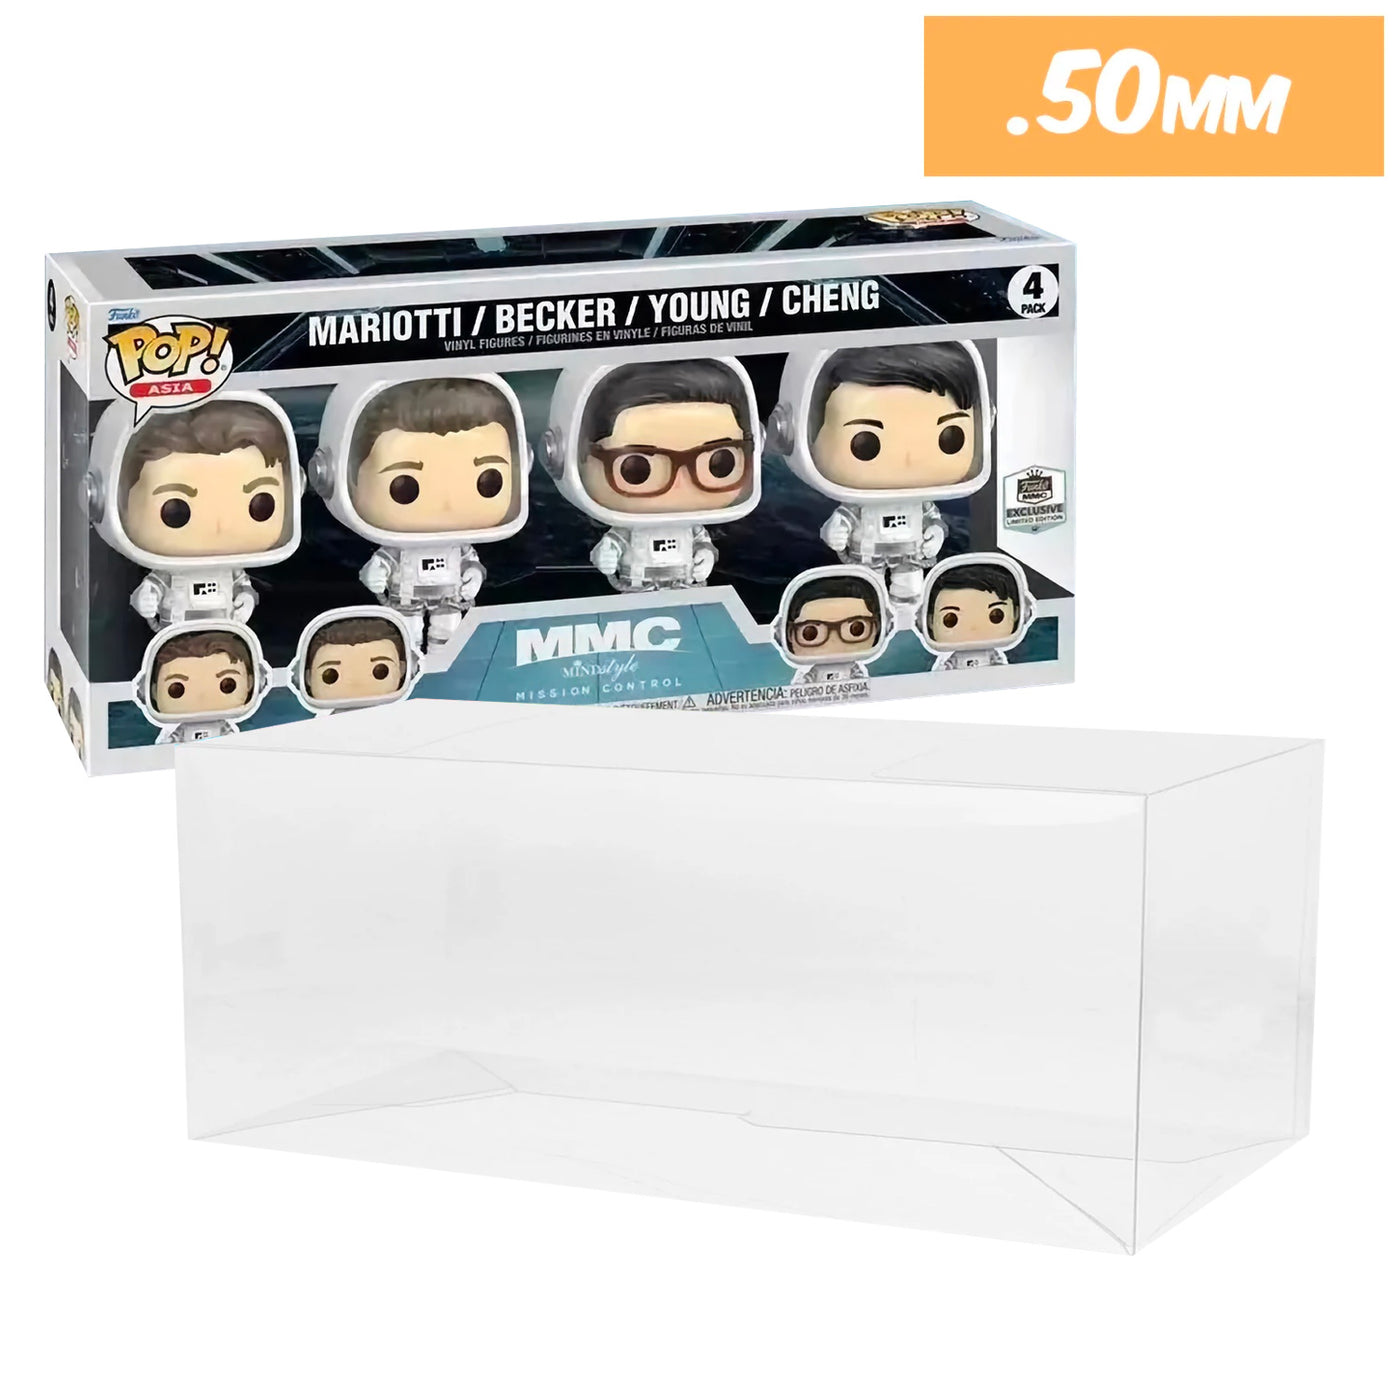 mission control mariotti becker young cheng 4 pack best funko pop protectors thick strong uv scratch flat top stack vinyl display geek plastic shield vaulted eco armor fits collect protect display case kollector protector